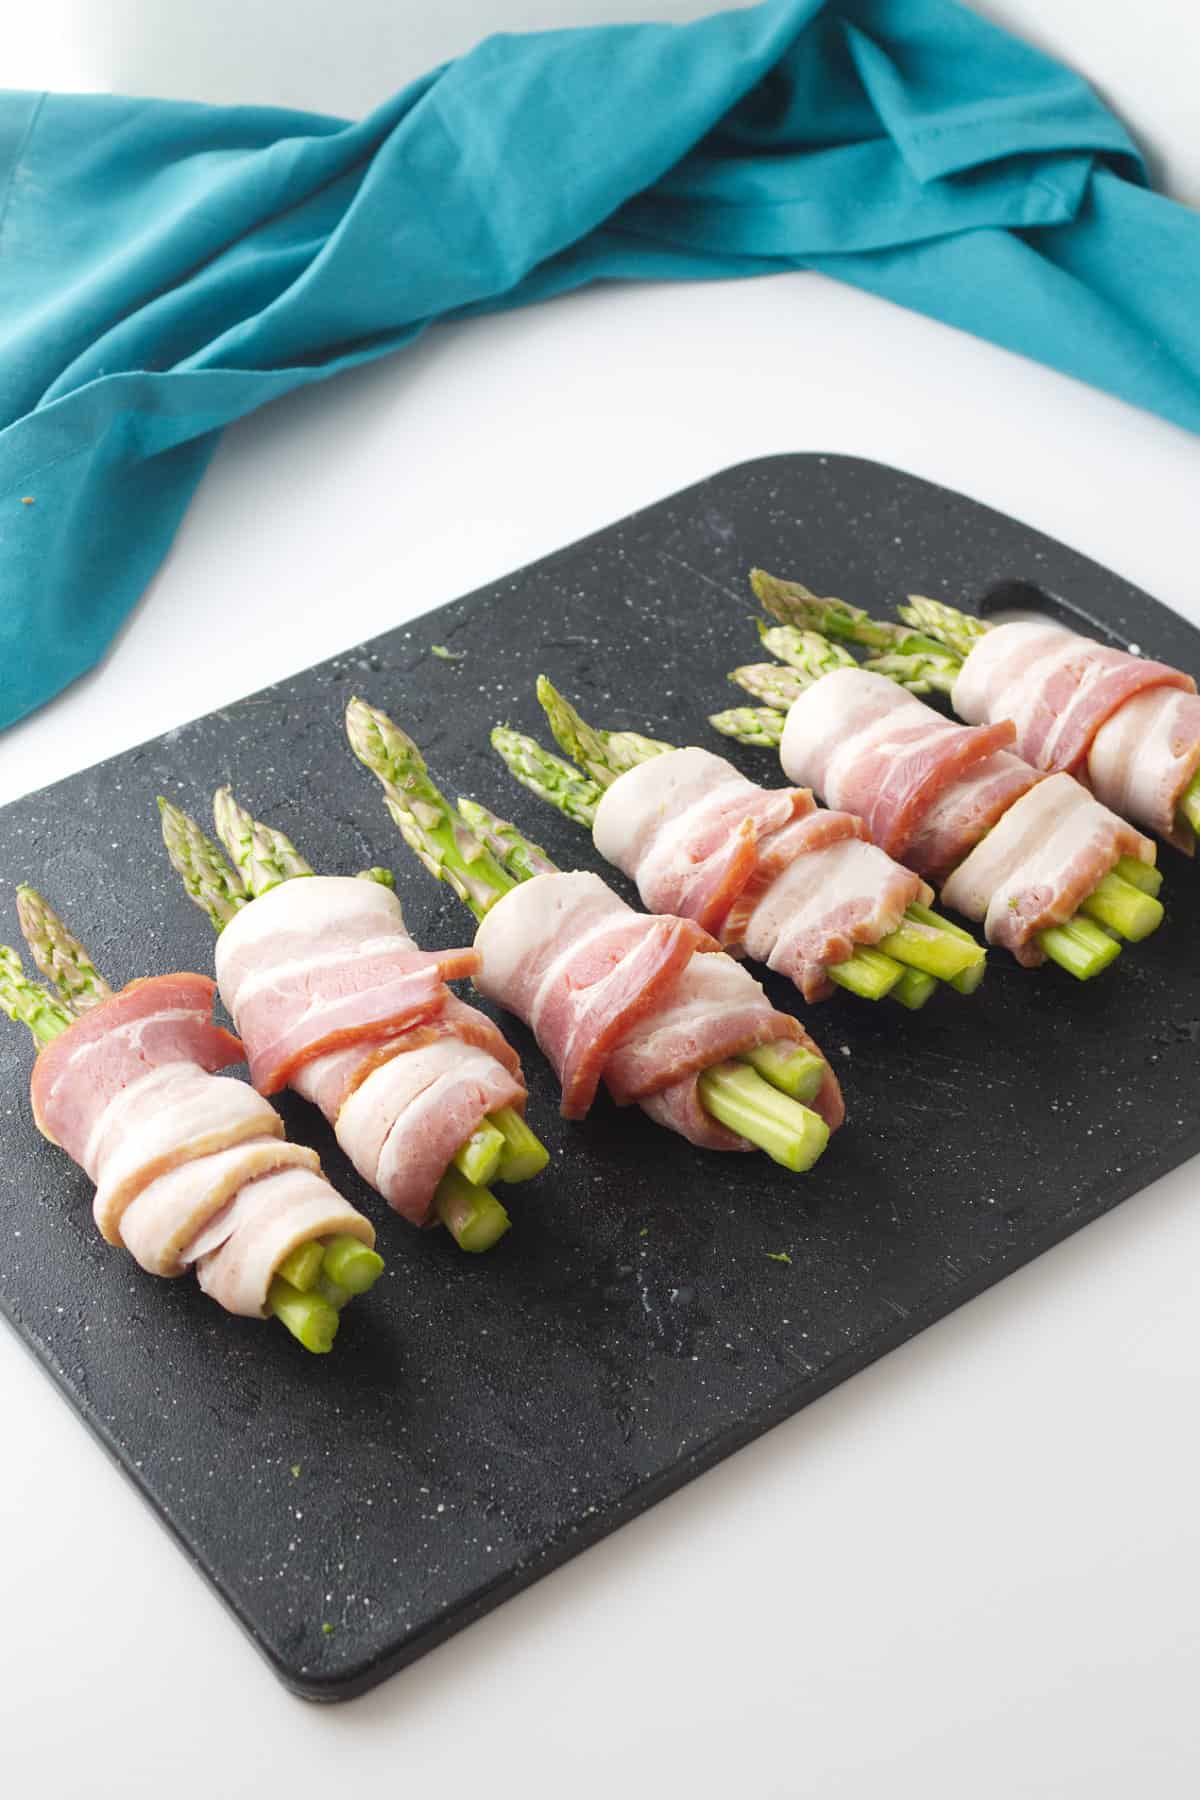 wrapping asparagus in bacon strips.